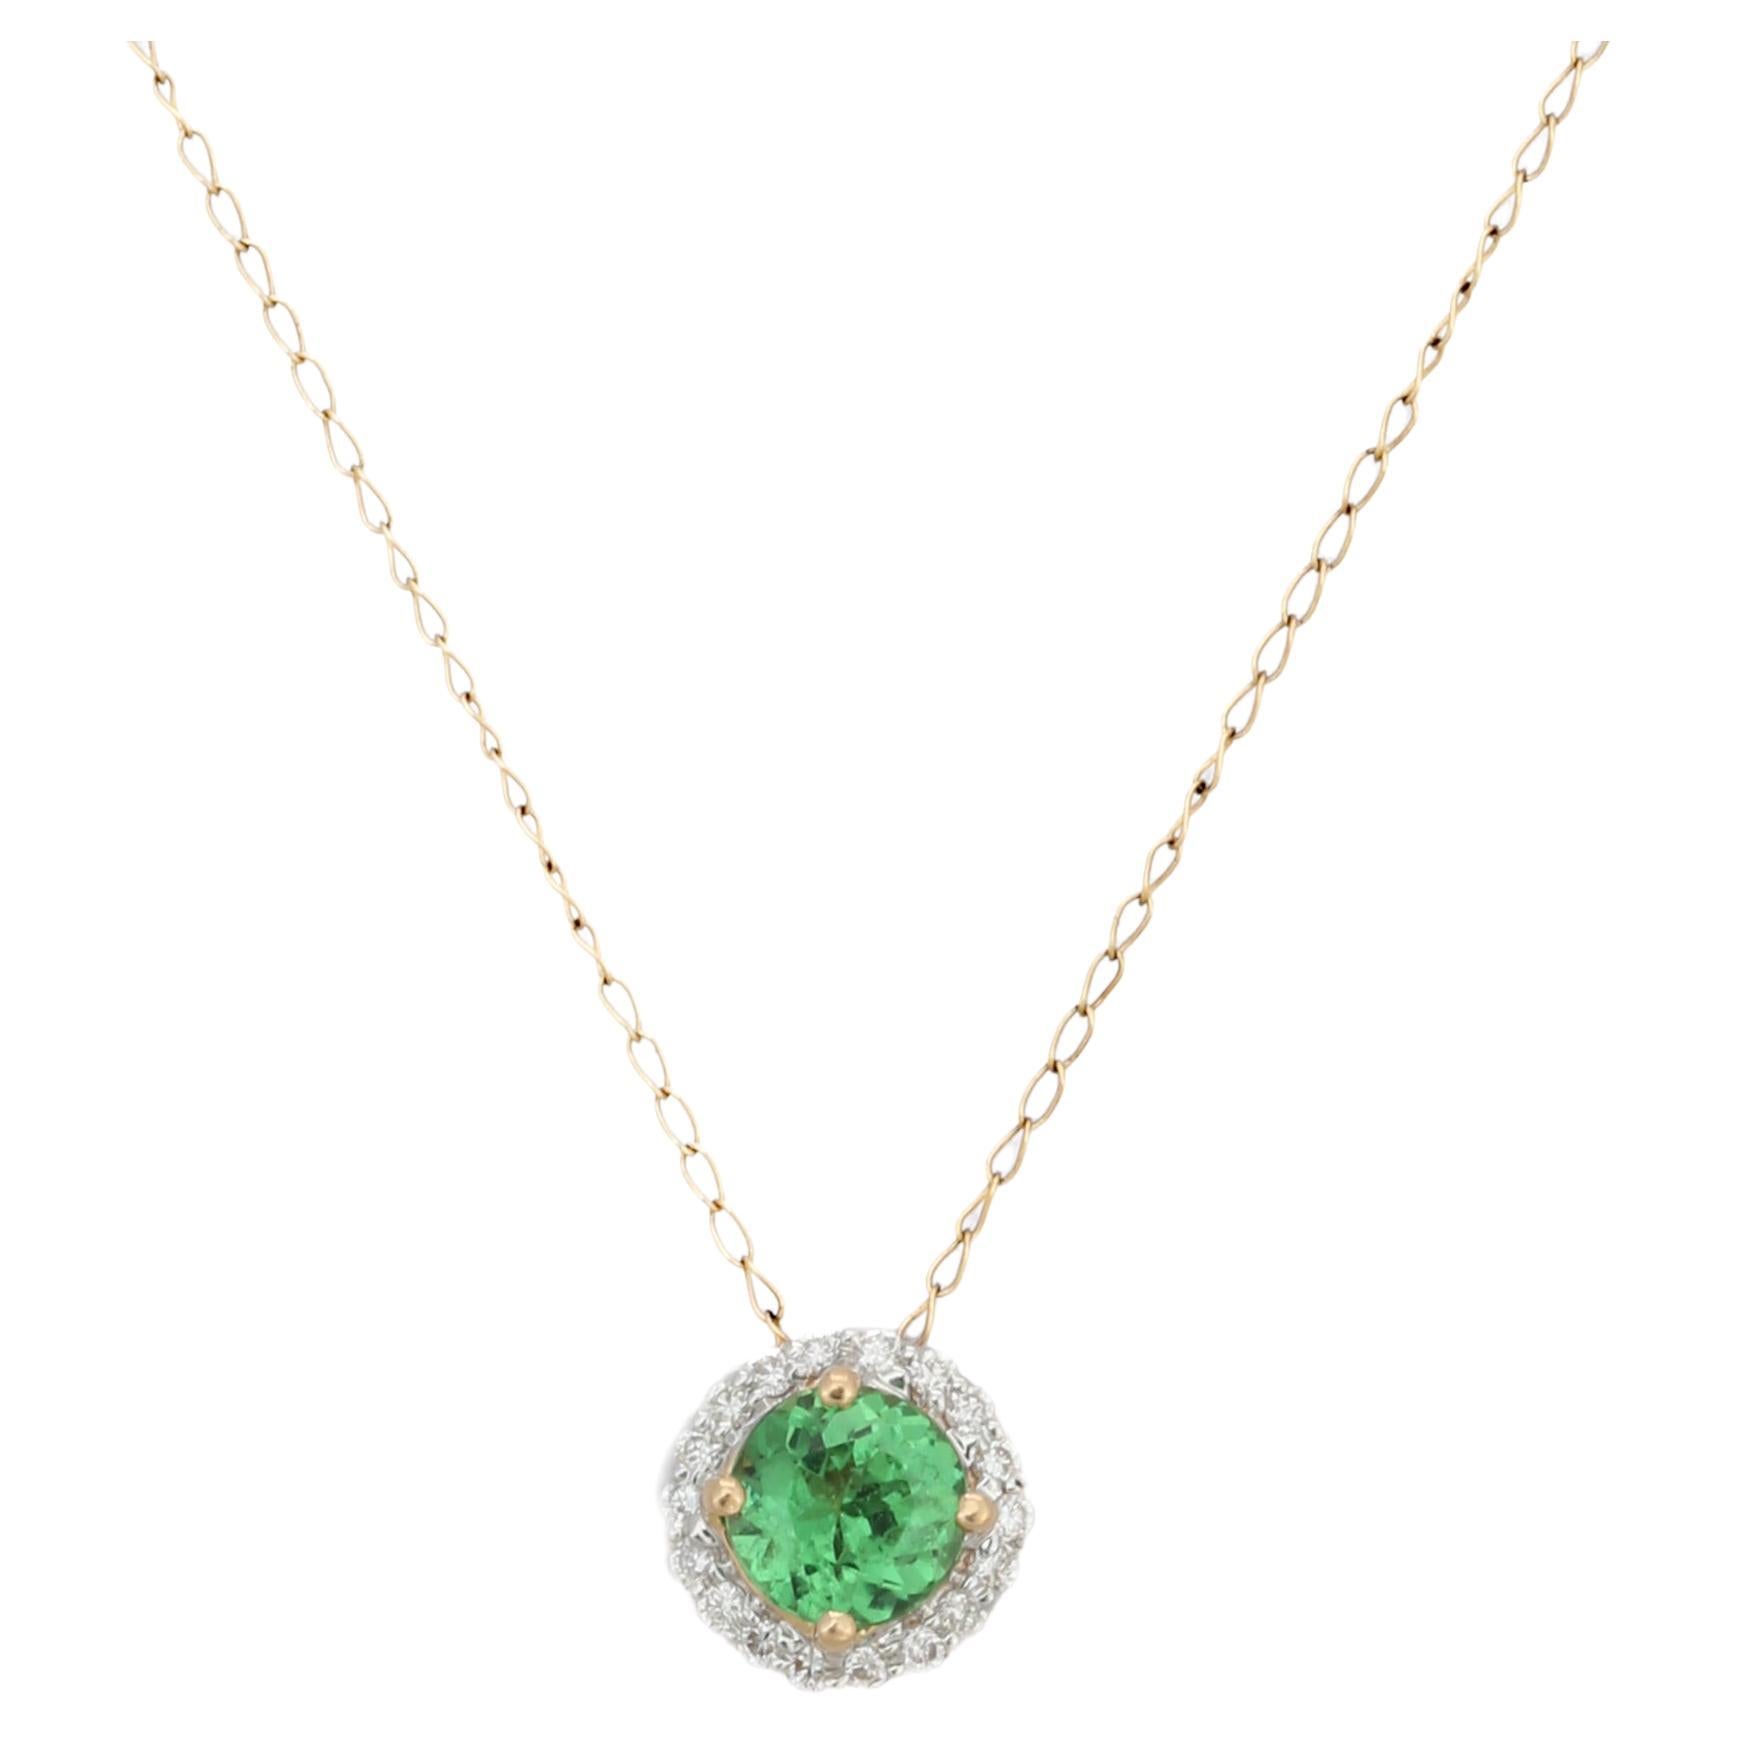 Halo Round Tsavorite Solitaire Necklace 18k Solid Yellow Gold, Gift For Her For Sale